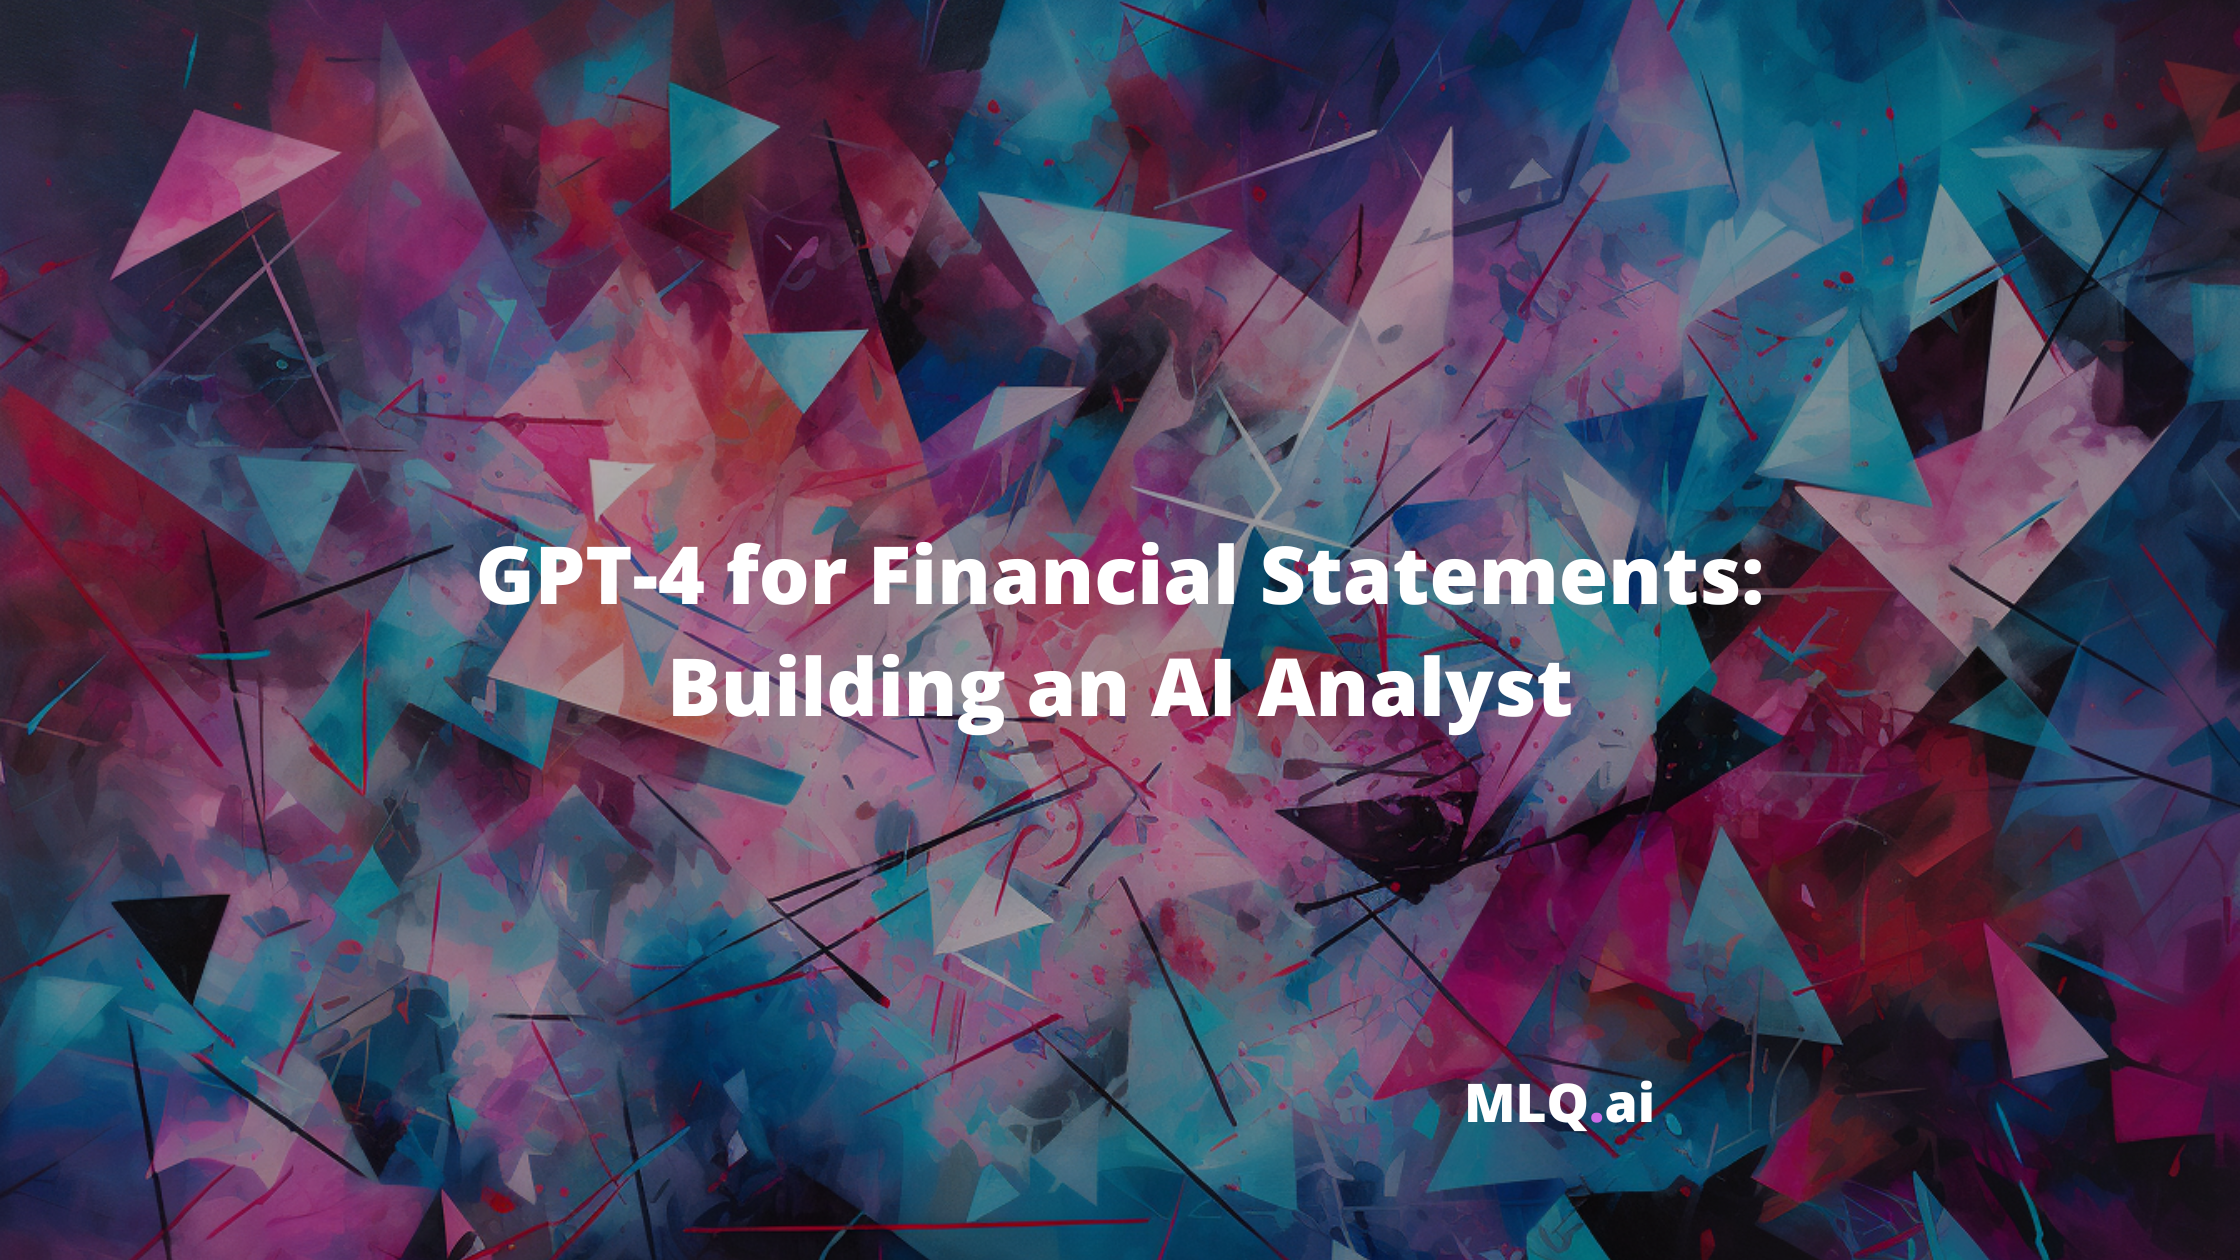 GPT-4 for Financial Statements: Building an AI Analyst post image